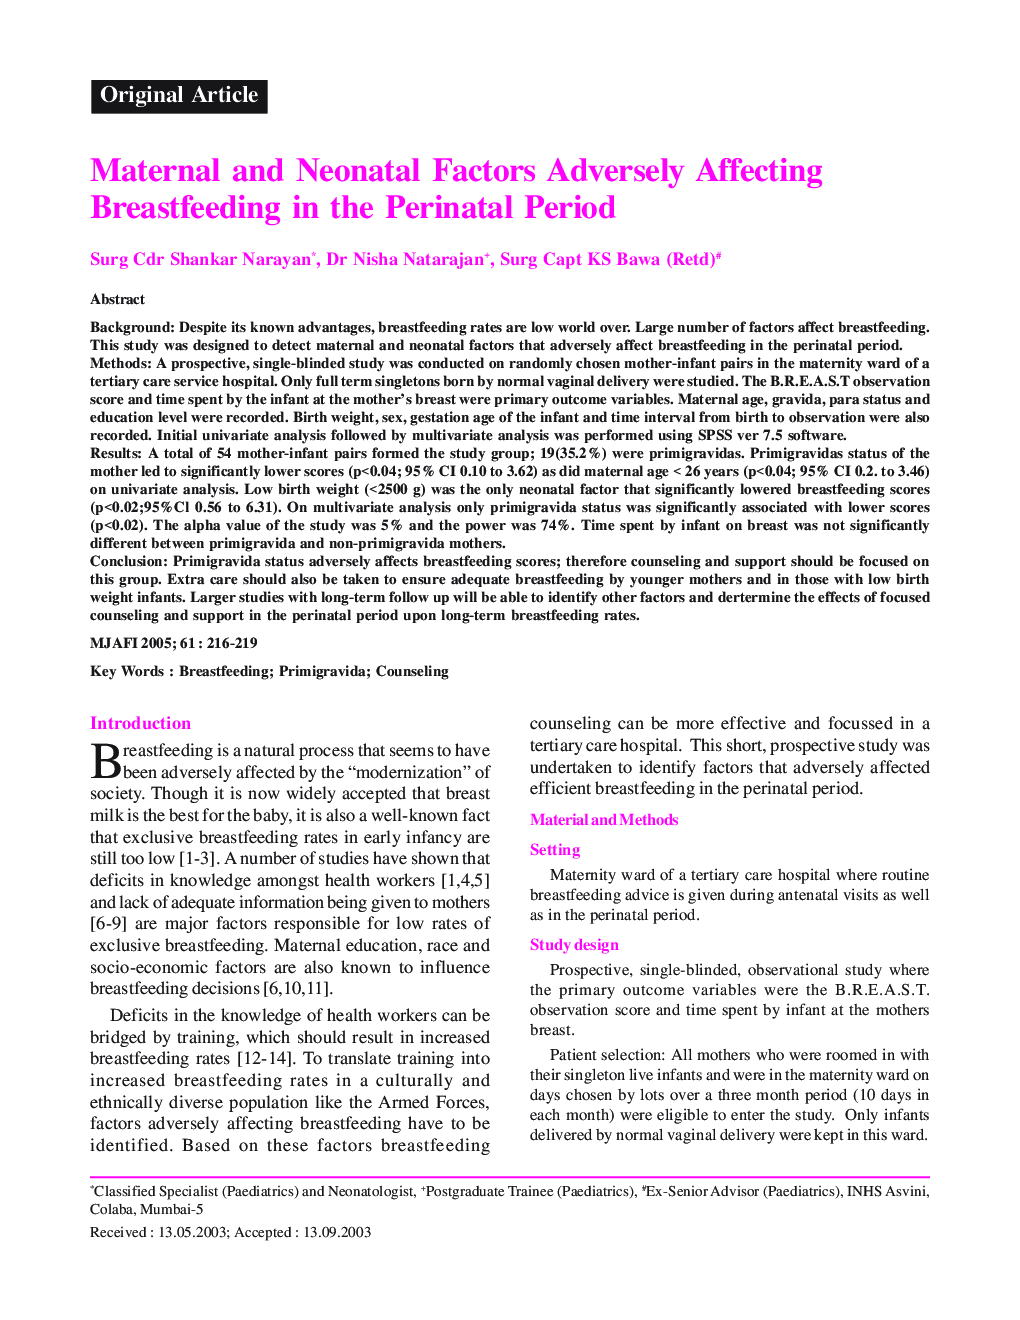 Maternal and Neonatal Factors Adversely Affecting Breastfeeding in the Perinatal Period